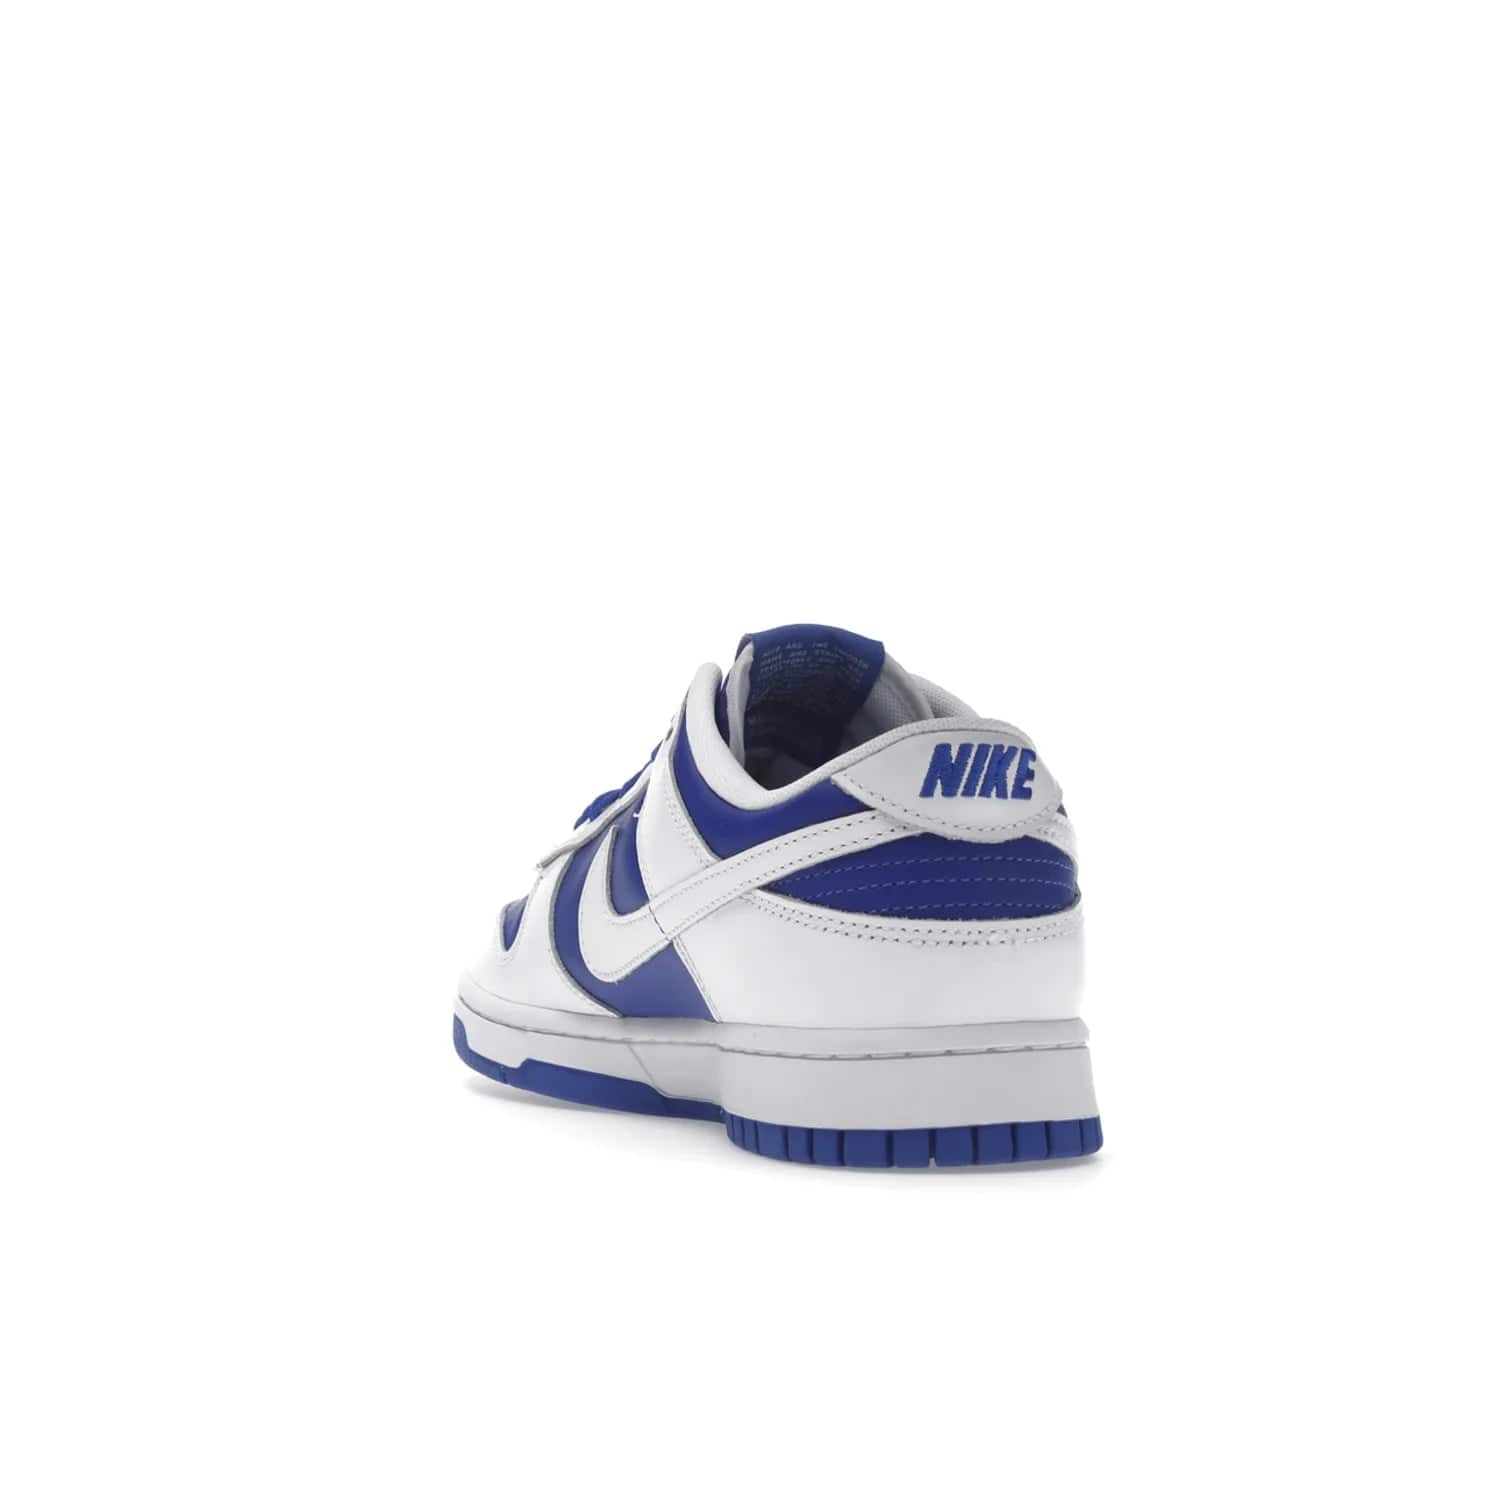 Nike Dunk Low Racer Blue White - Image 26 - Only at www.BallersClubKickz.com - Sleek Racer Blue leather upper and white leather overlays make up the Nike Dunk Low Racer Blue White. Woven tag and heel embroidery for a 1985 Dunk look with a matching EVA foam sole completes the classic colorway.